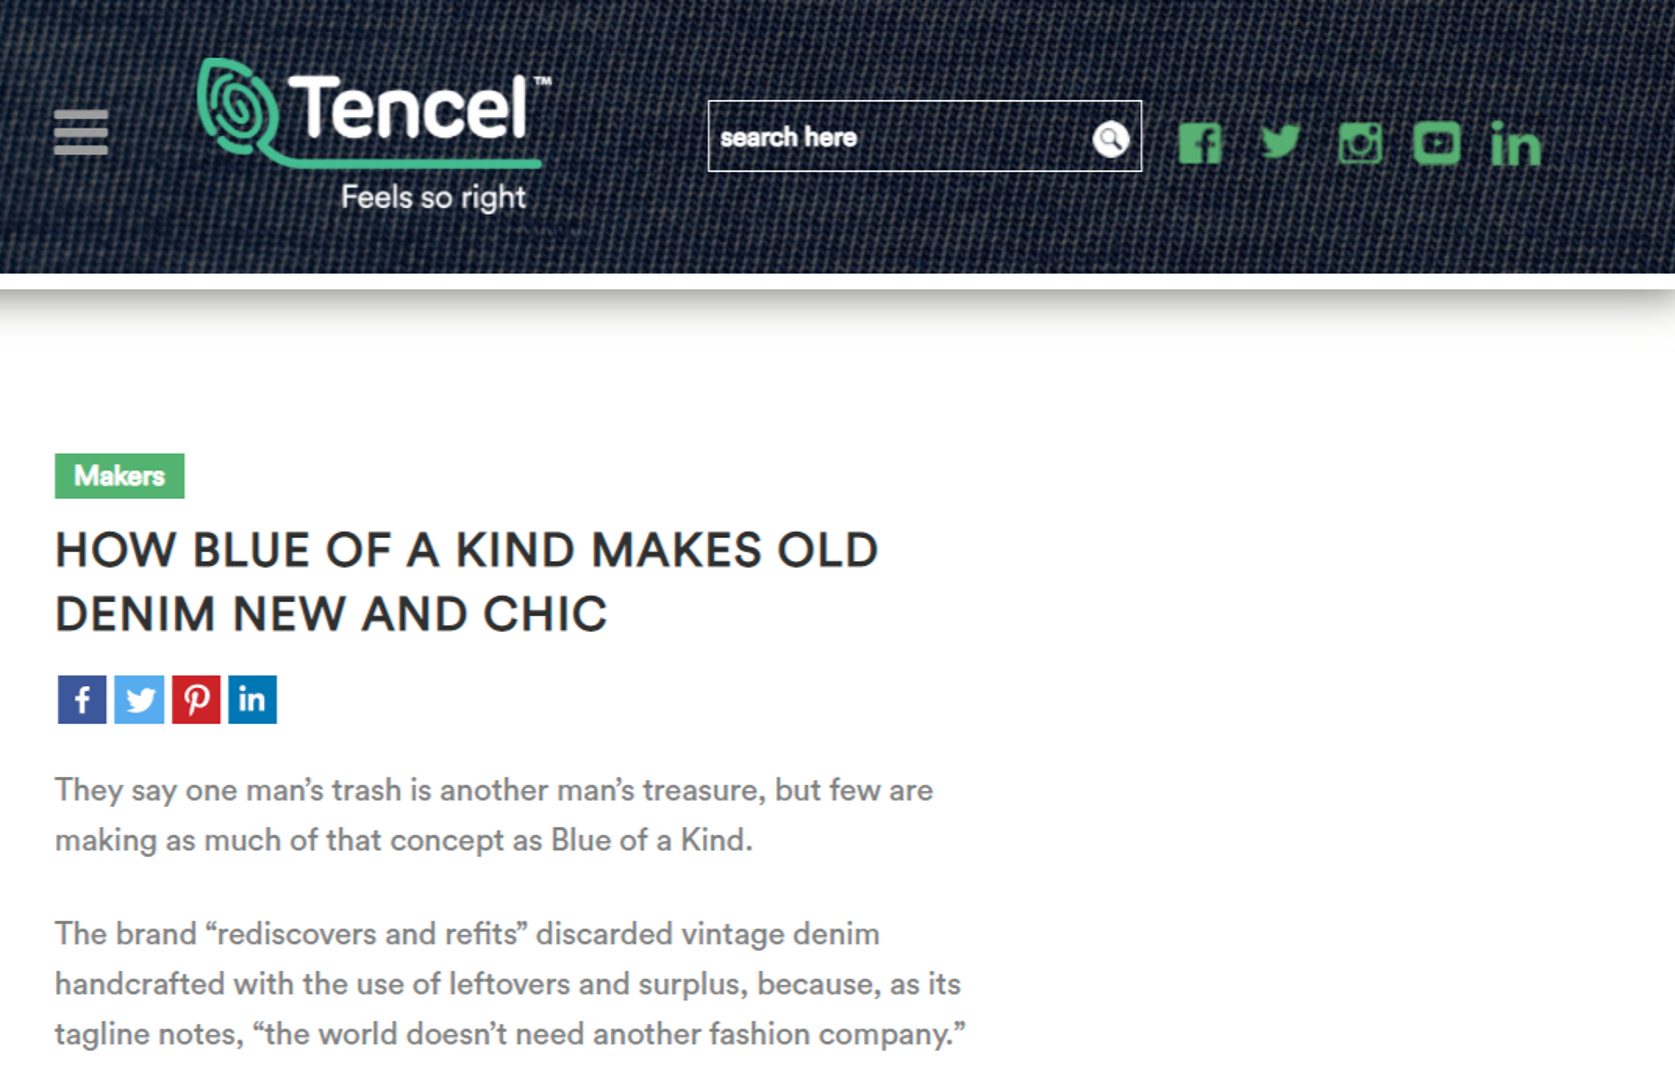 Tencel.com - How Blue of a Kind makes old denim new and chic